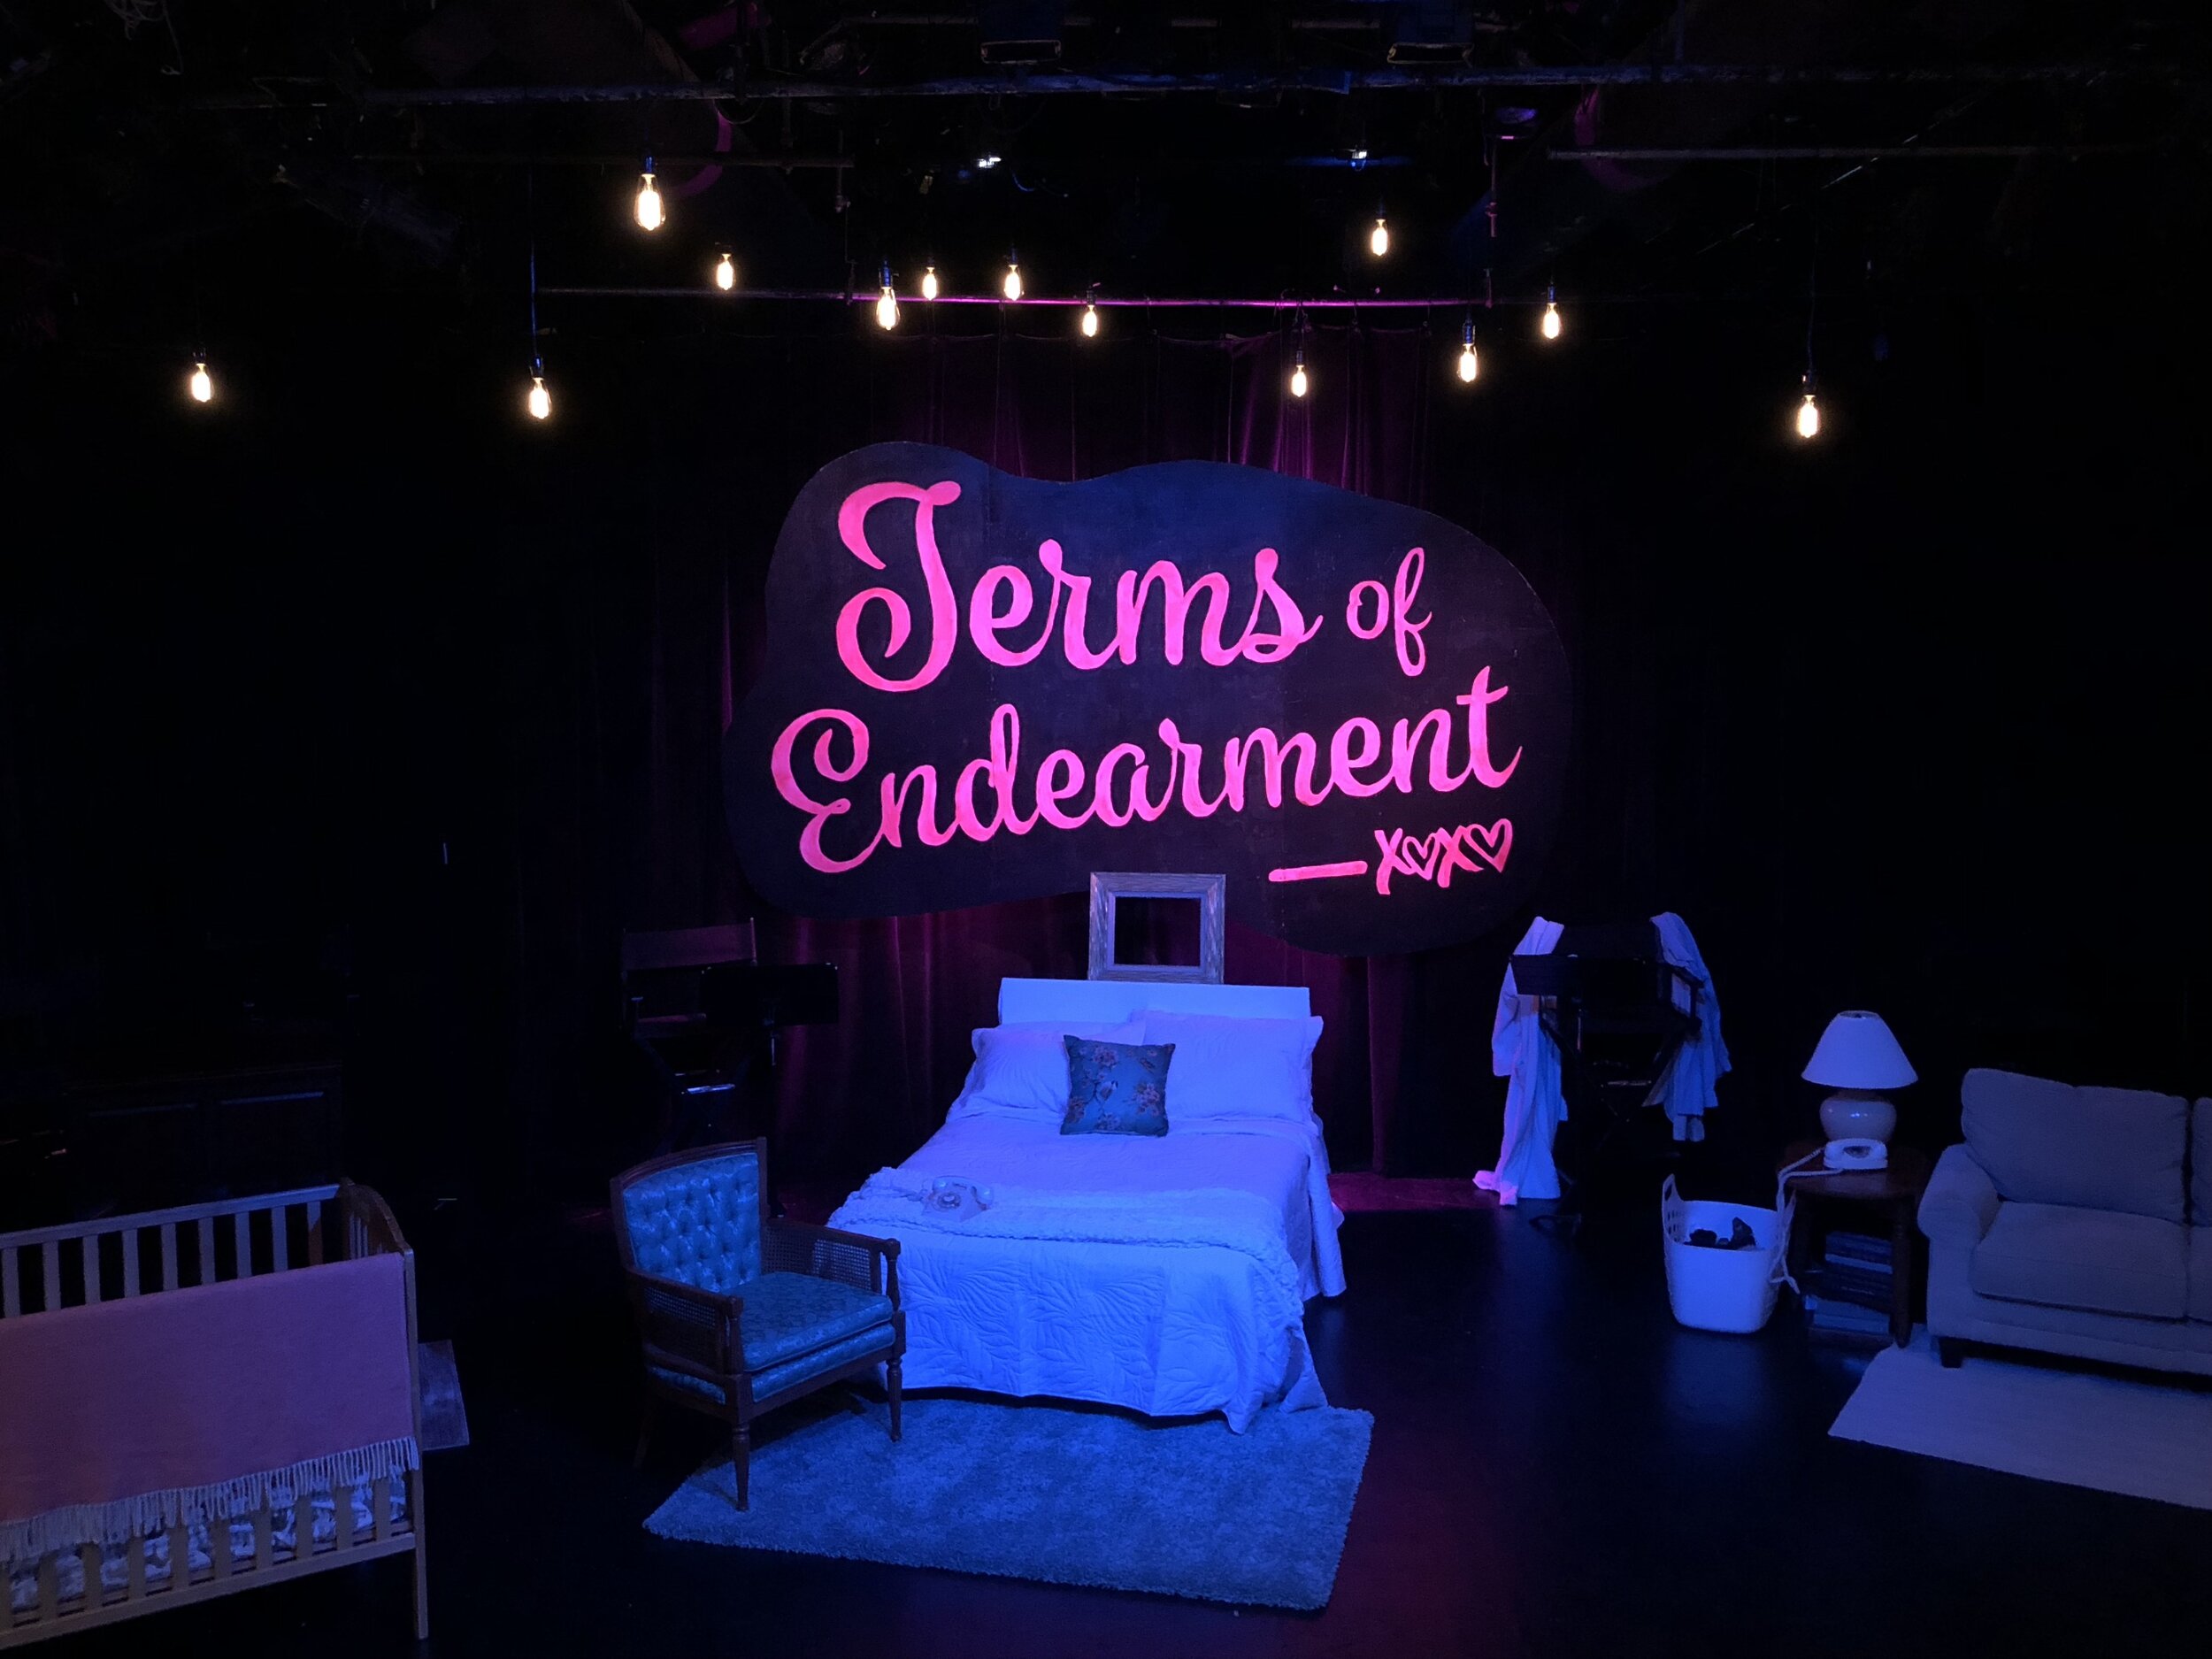   Terms of Endearment  (Staged Reading) Theatre Workshop of Nantucket 2018. [Production Designer] 